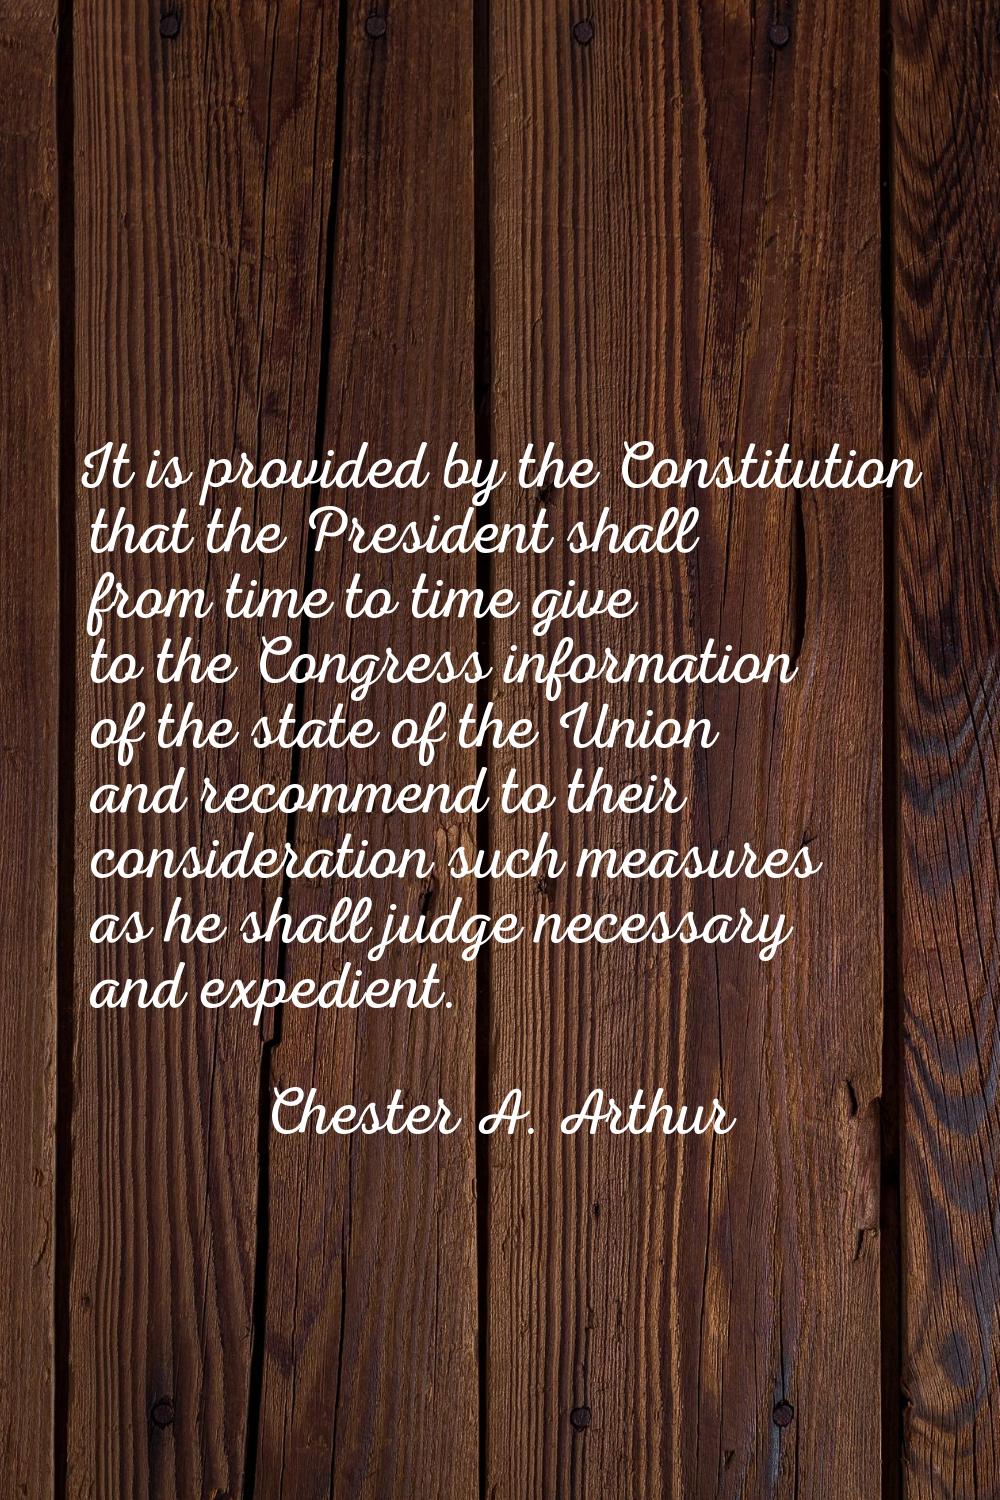 It is provided by the Constitution that the President shall from time to time give to the Congress 